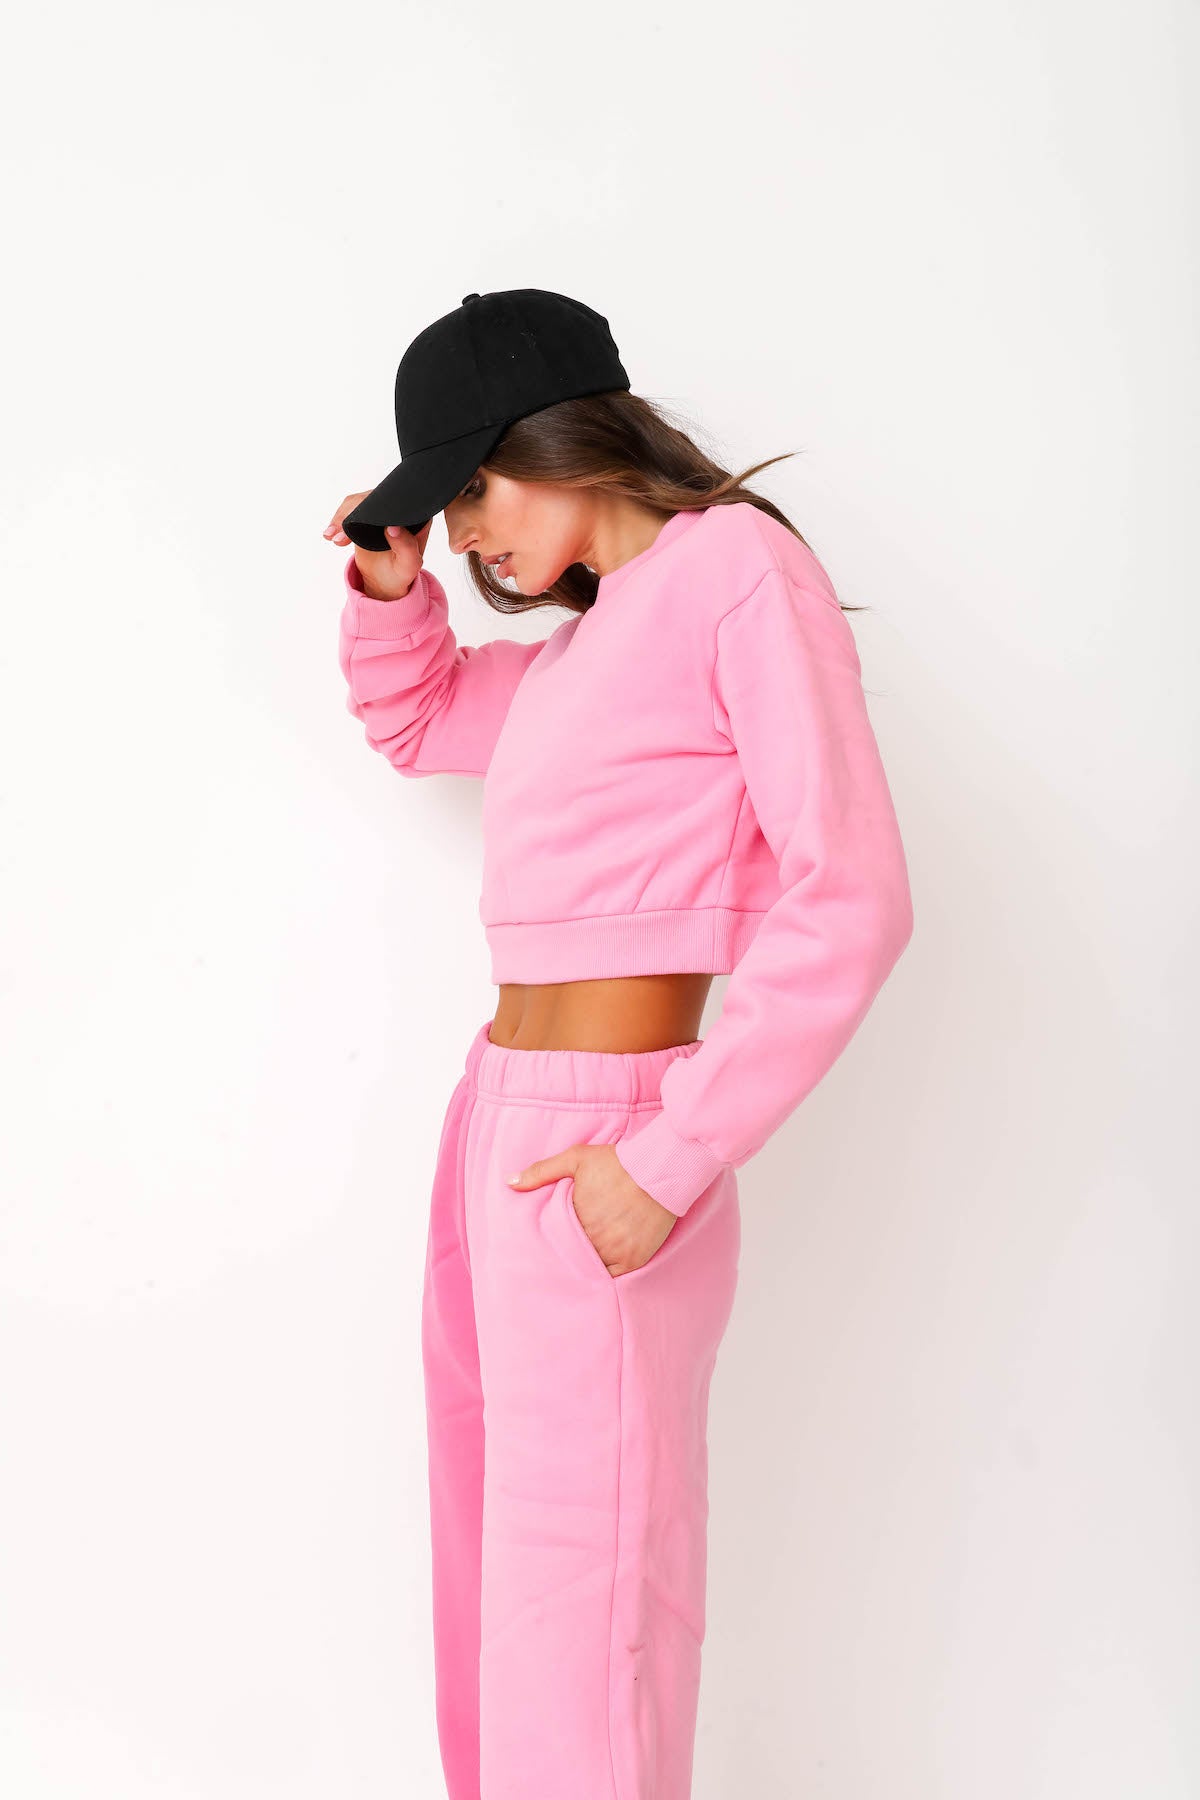 Cropped Sweater - Pink